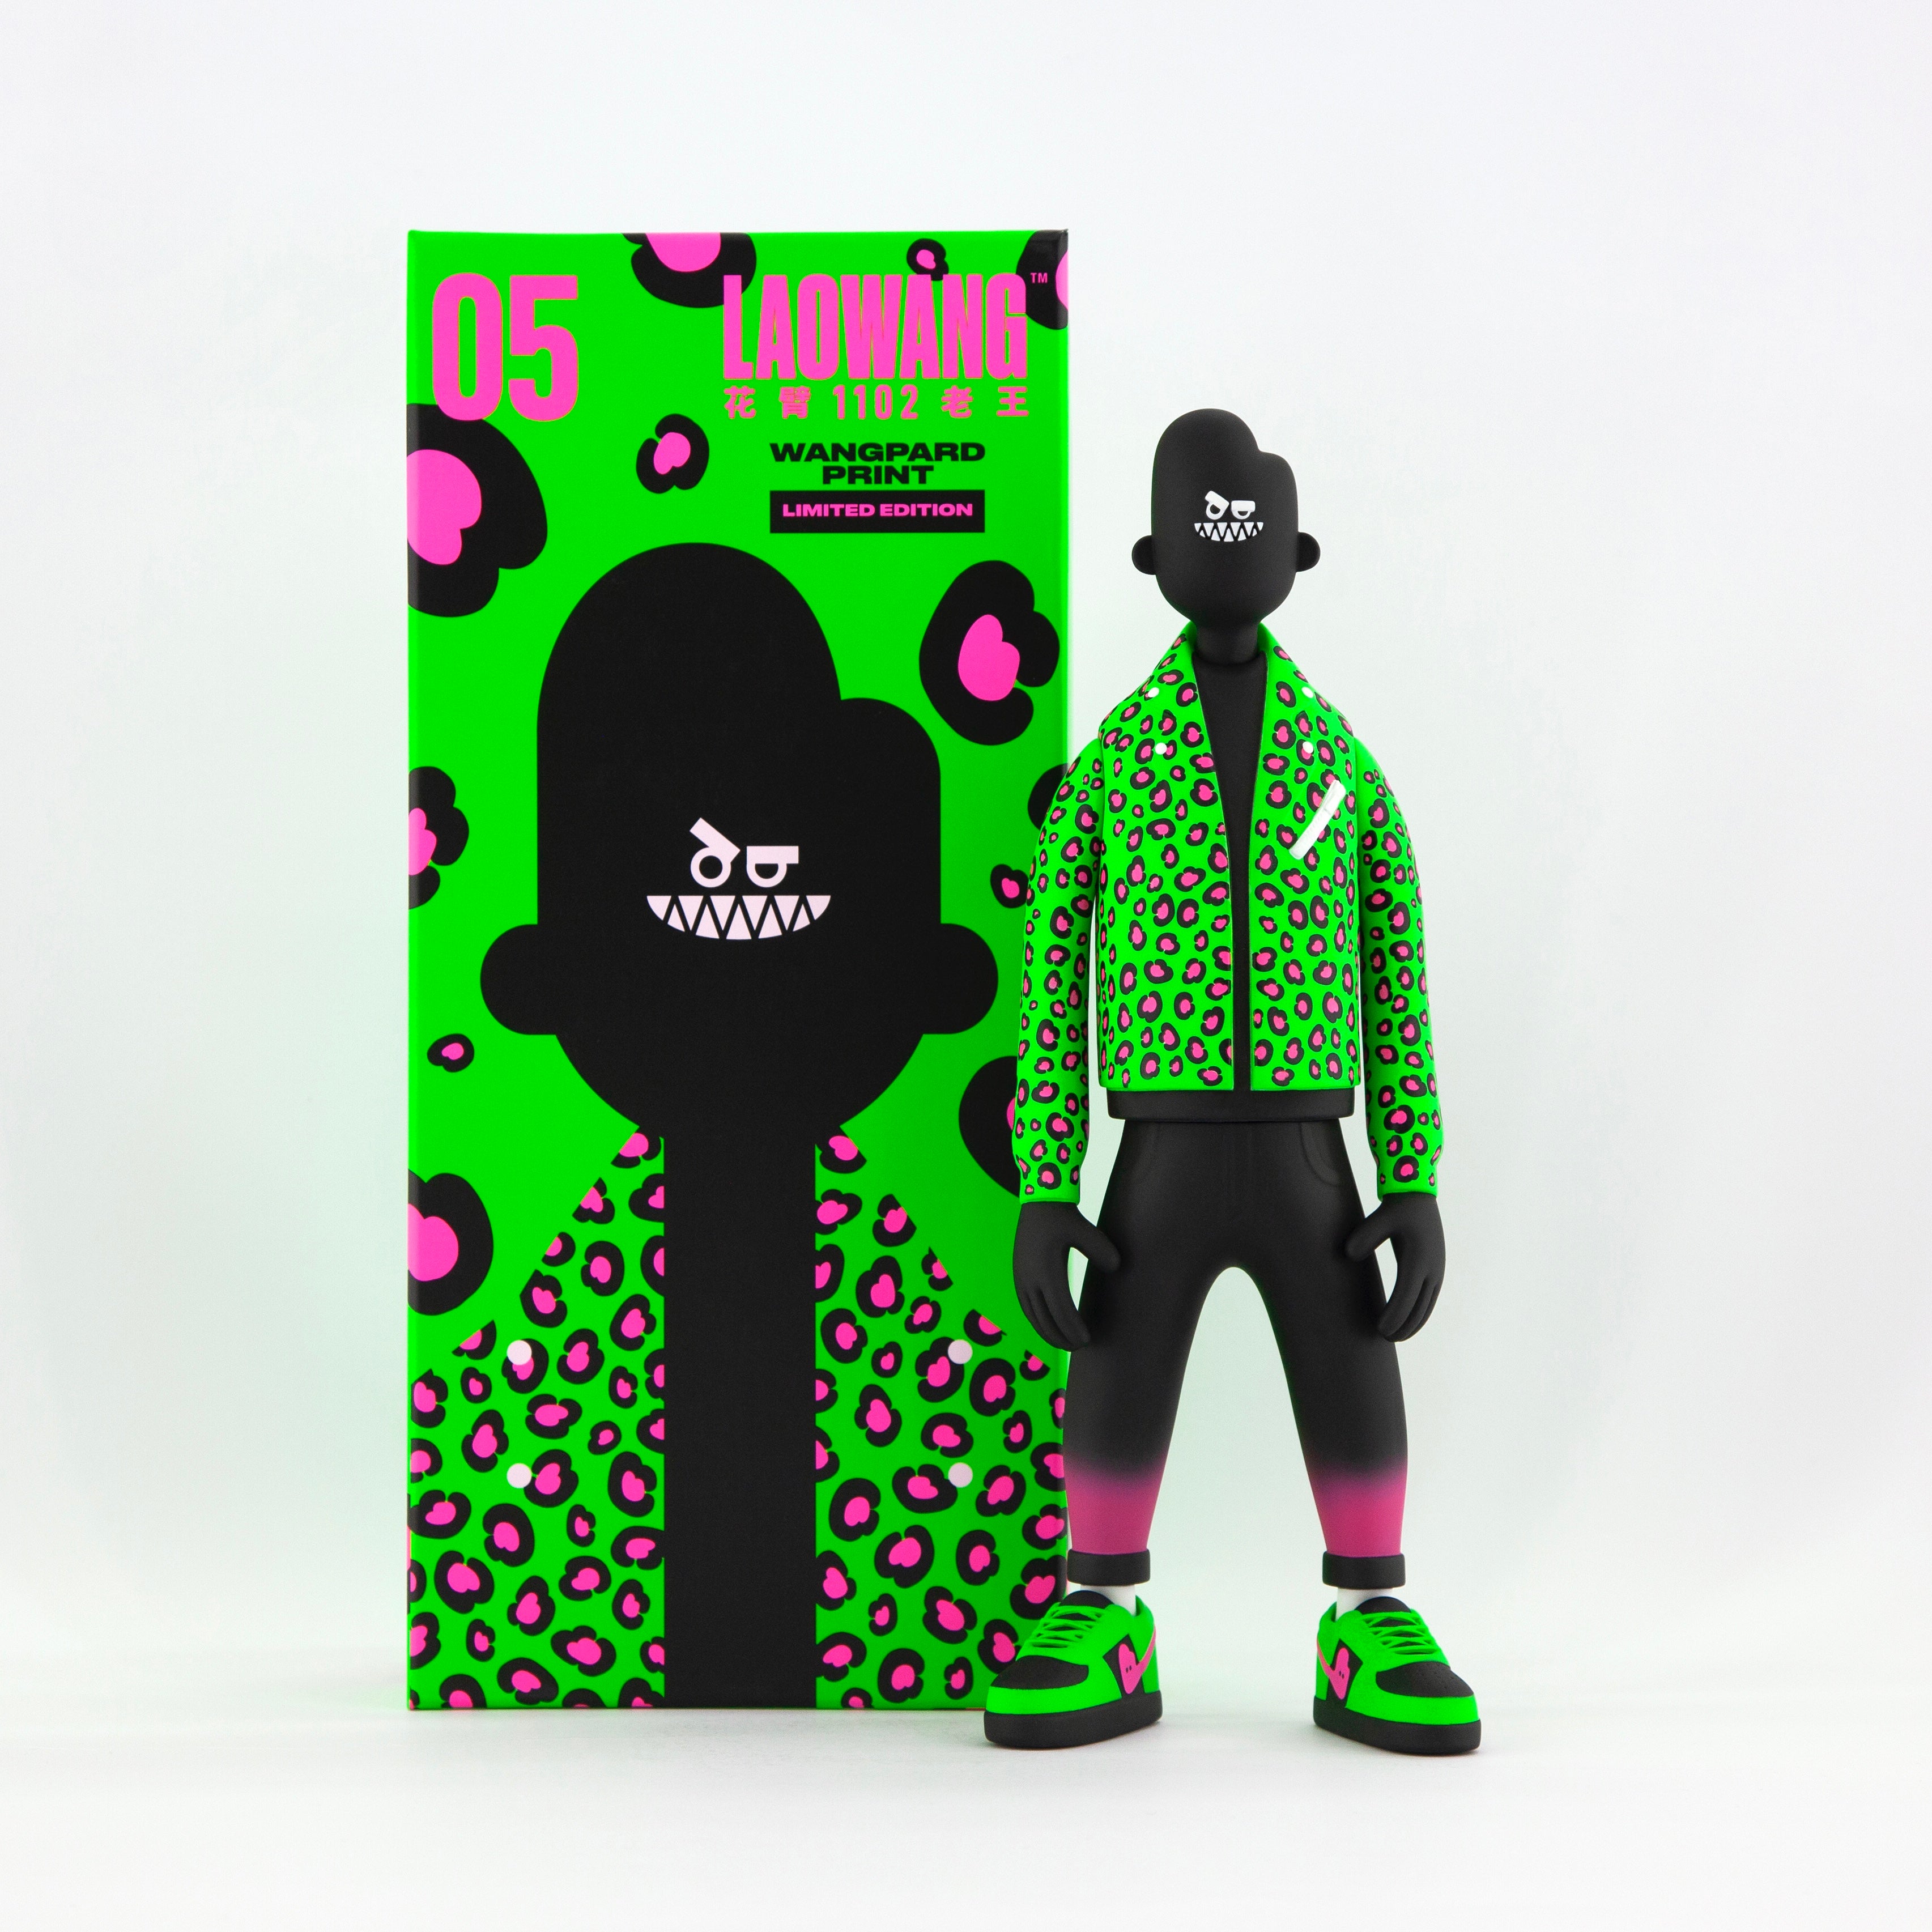 Toy figure and mannequin in green jacket next to Wangpardprint box, limited edition PVC.